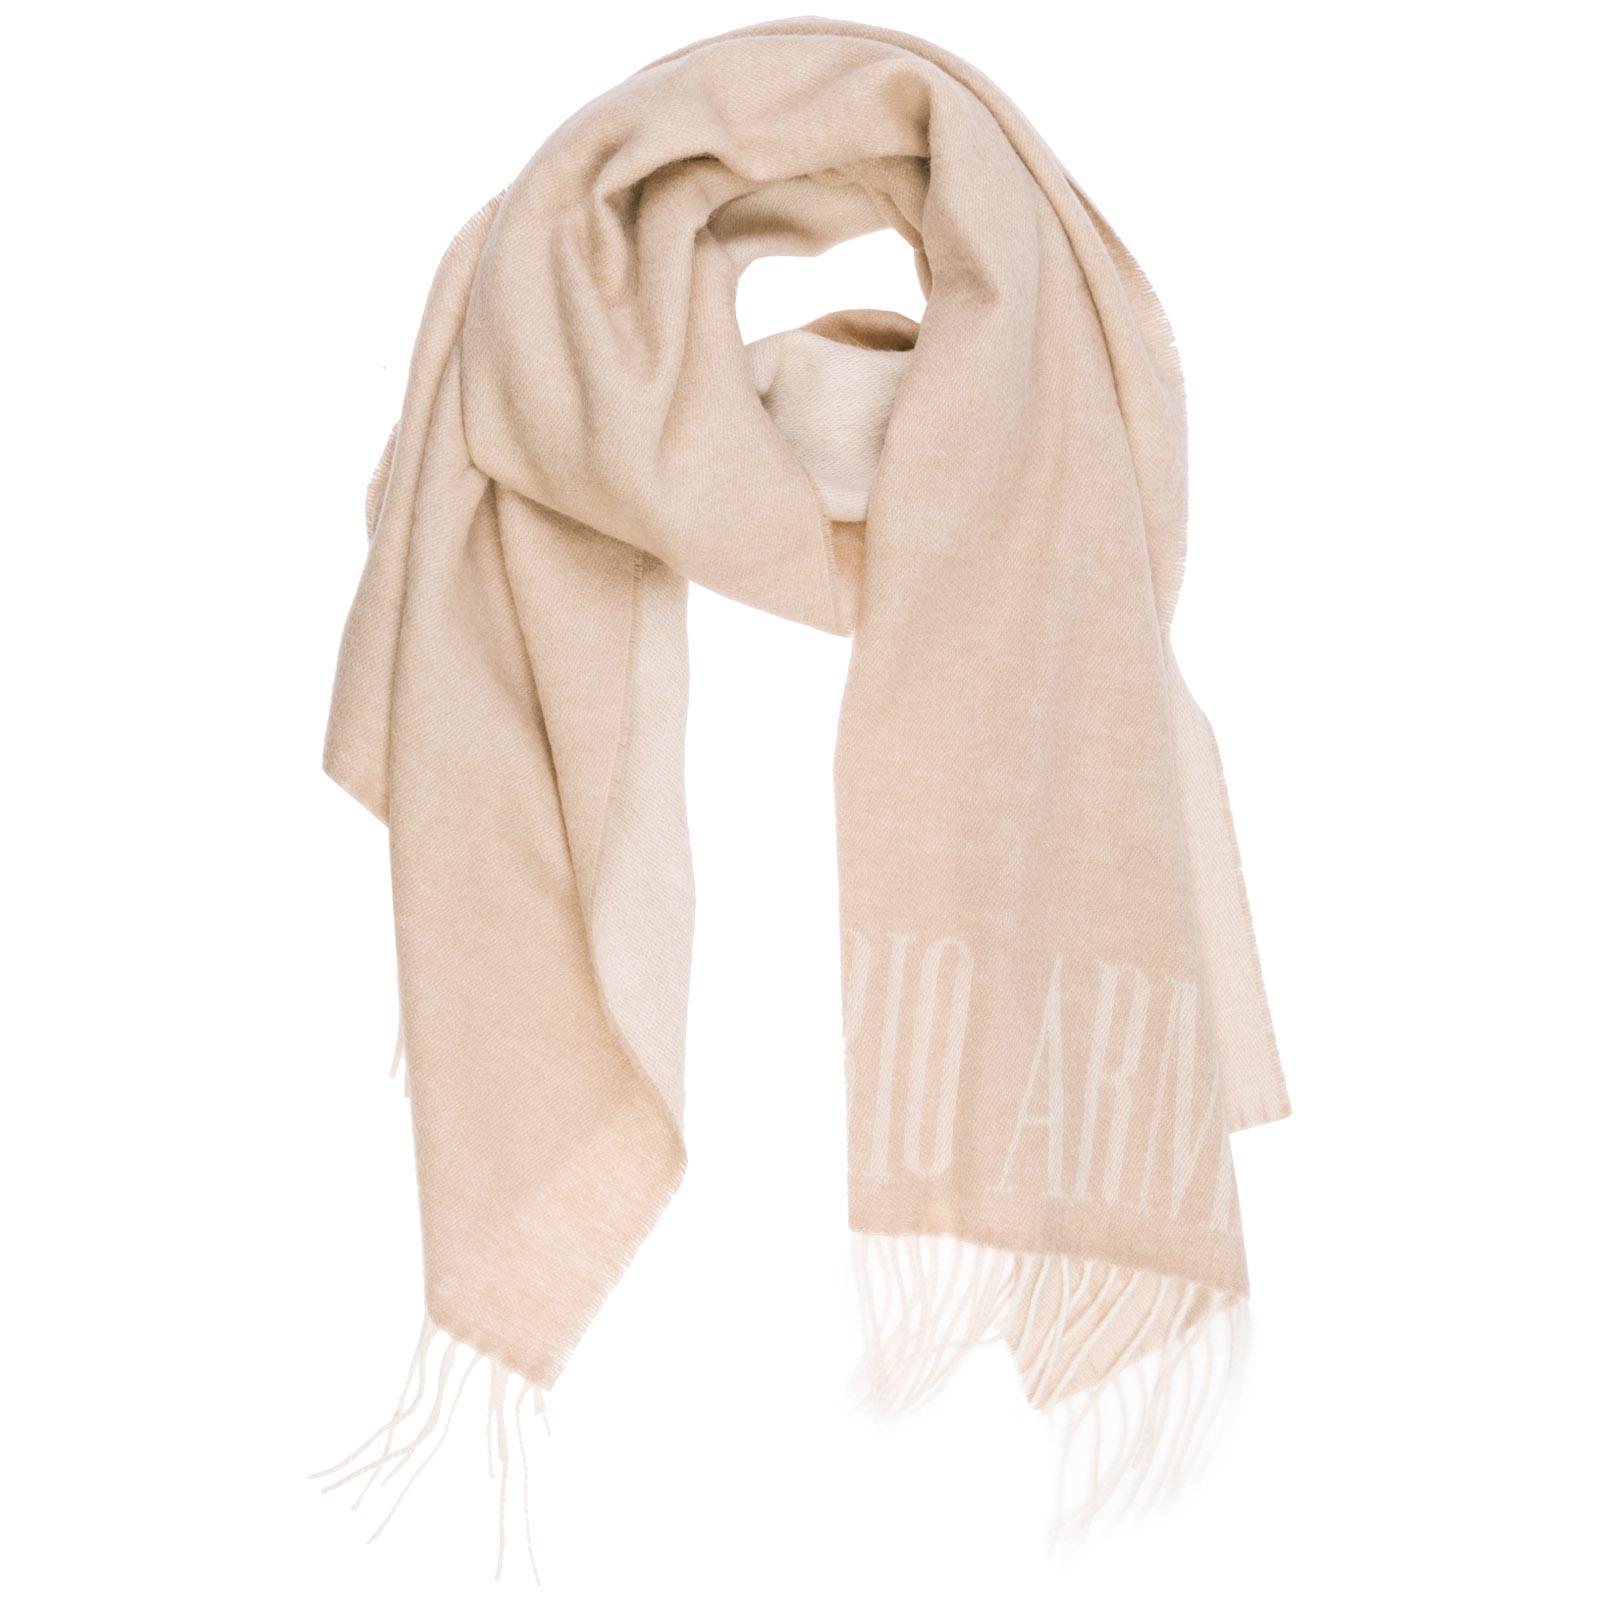 Emporio Armani Wool Scarf in Natural for Men - Lyst